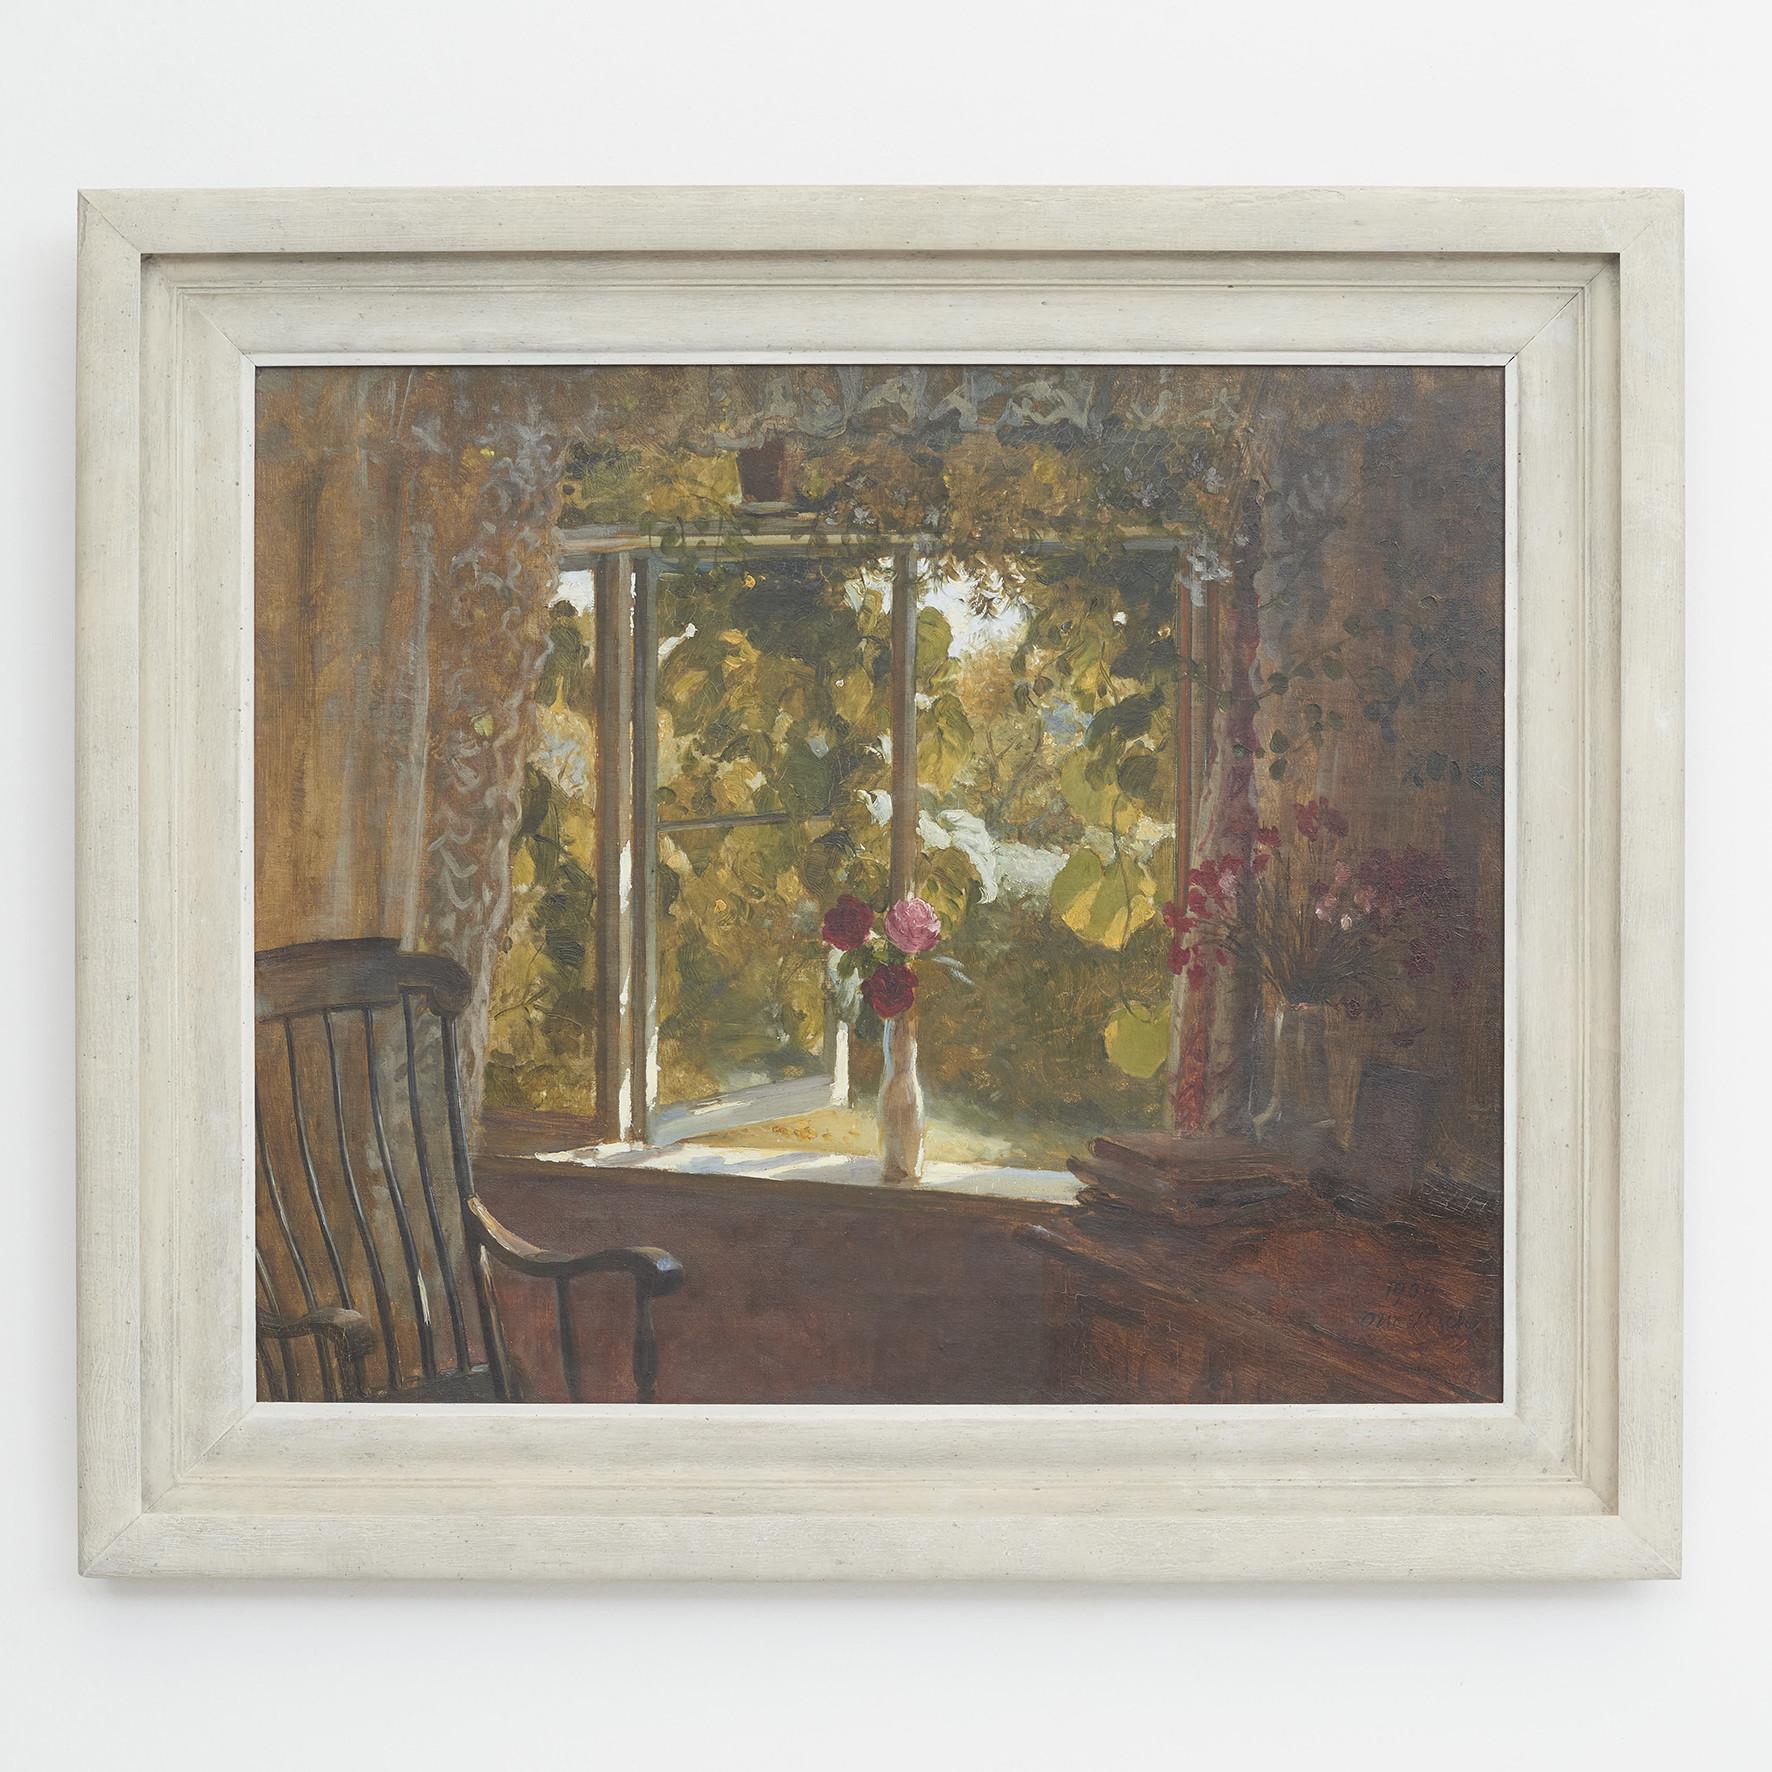 Otto Bache 1839-1927. Danish realist painter.
A summer day from the artist's living room with a view of the garden in full bloom.
Oil on canvas. Signed Otto Bache 1904.
Danish Realist painter.
At age eleven he received a dispensation and was